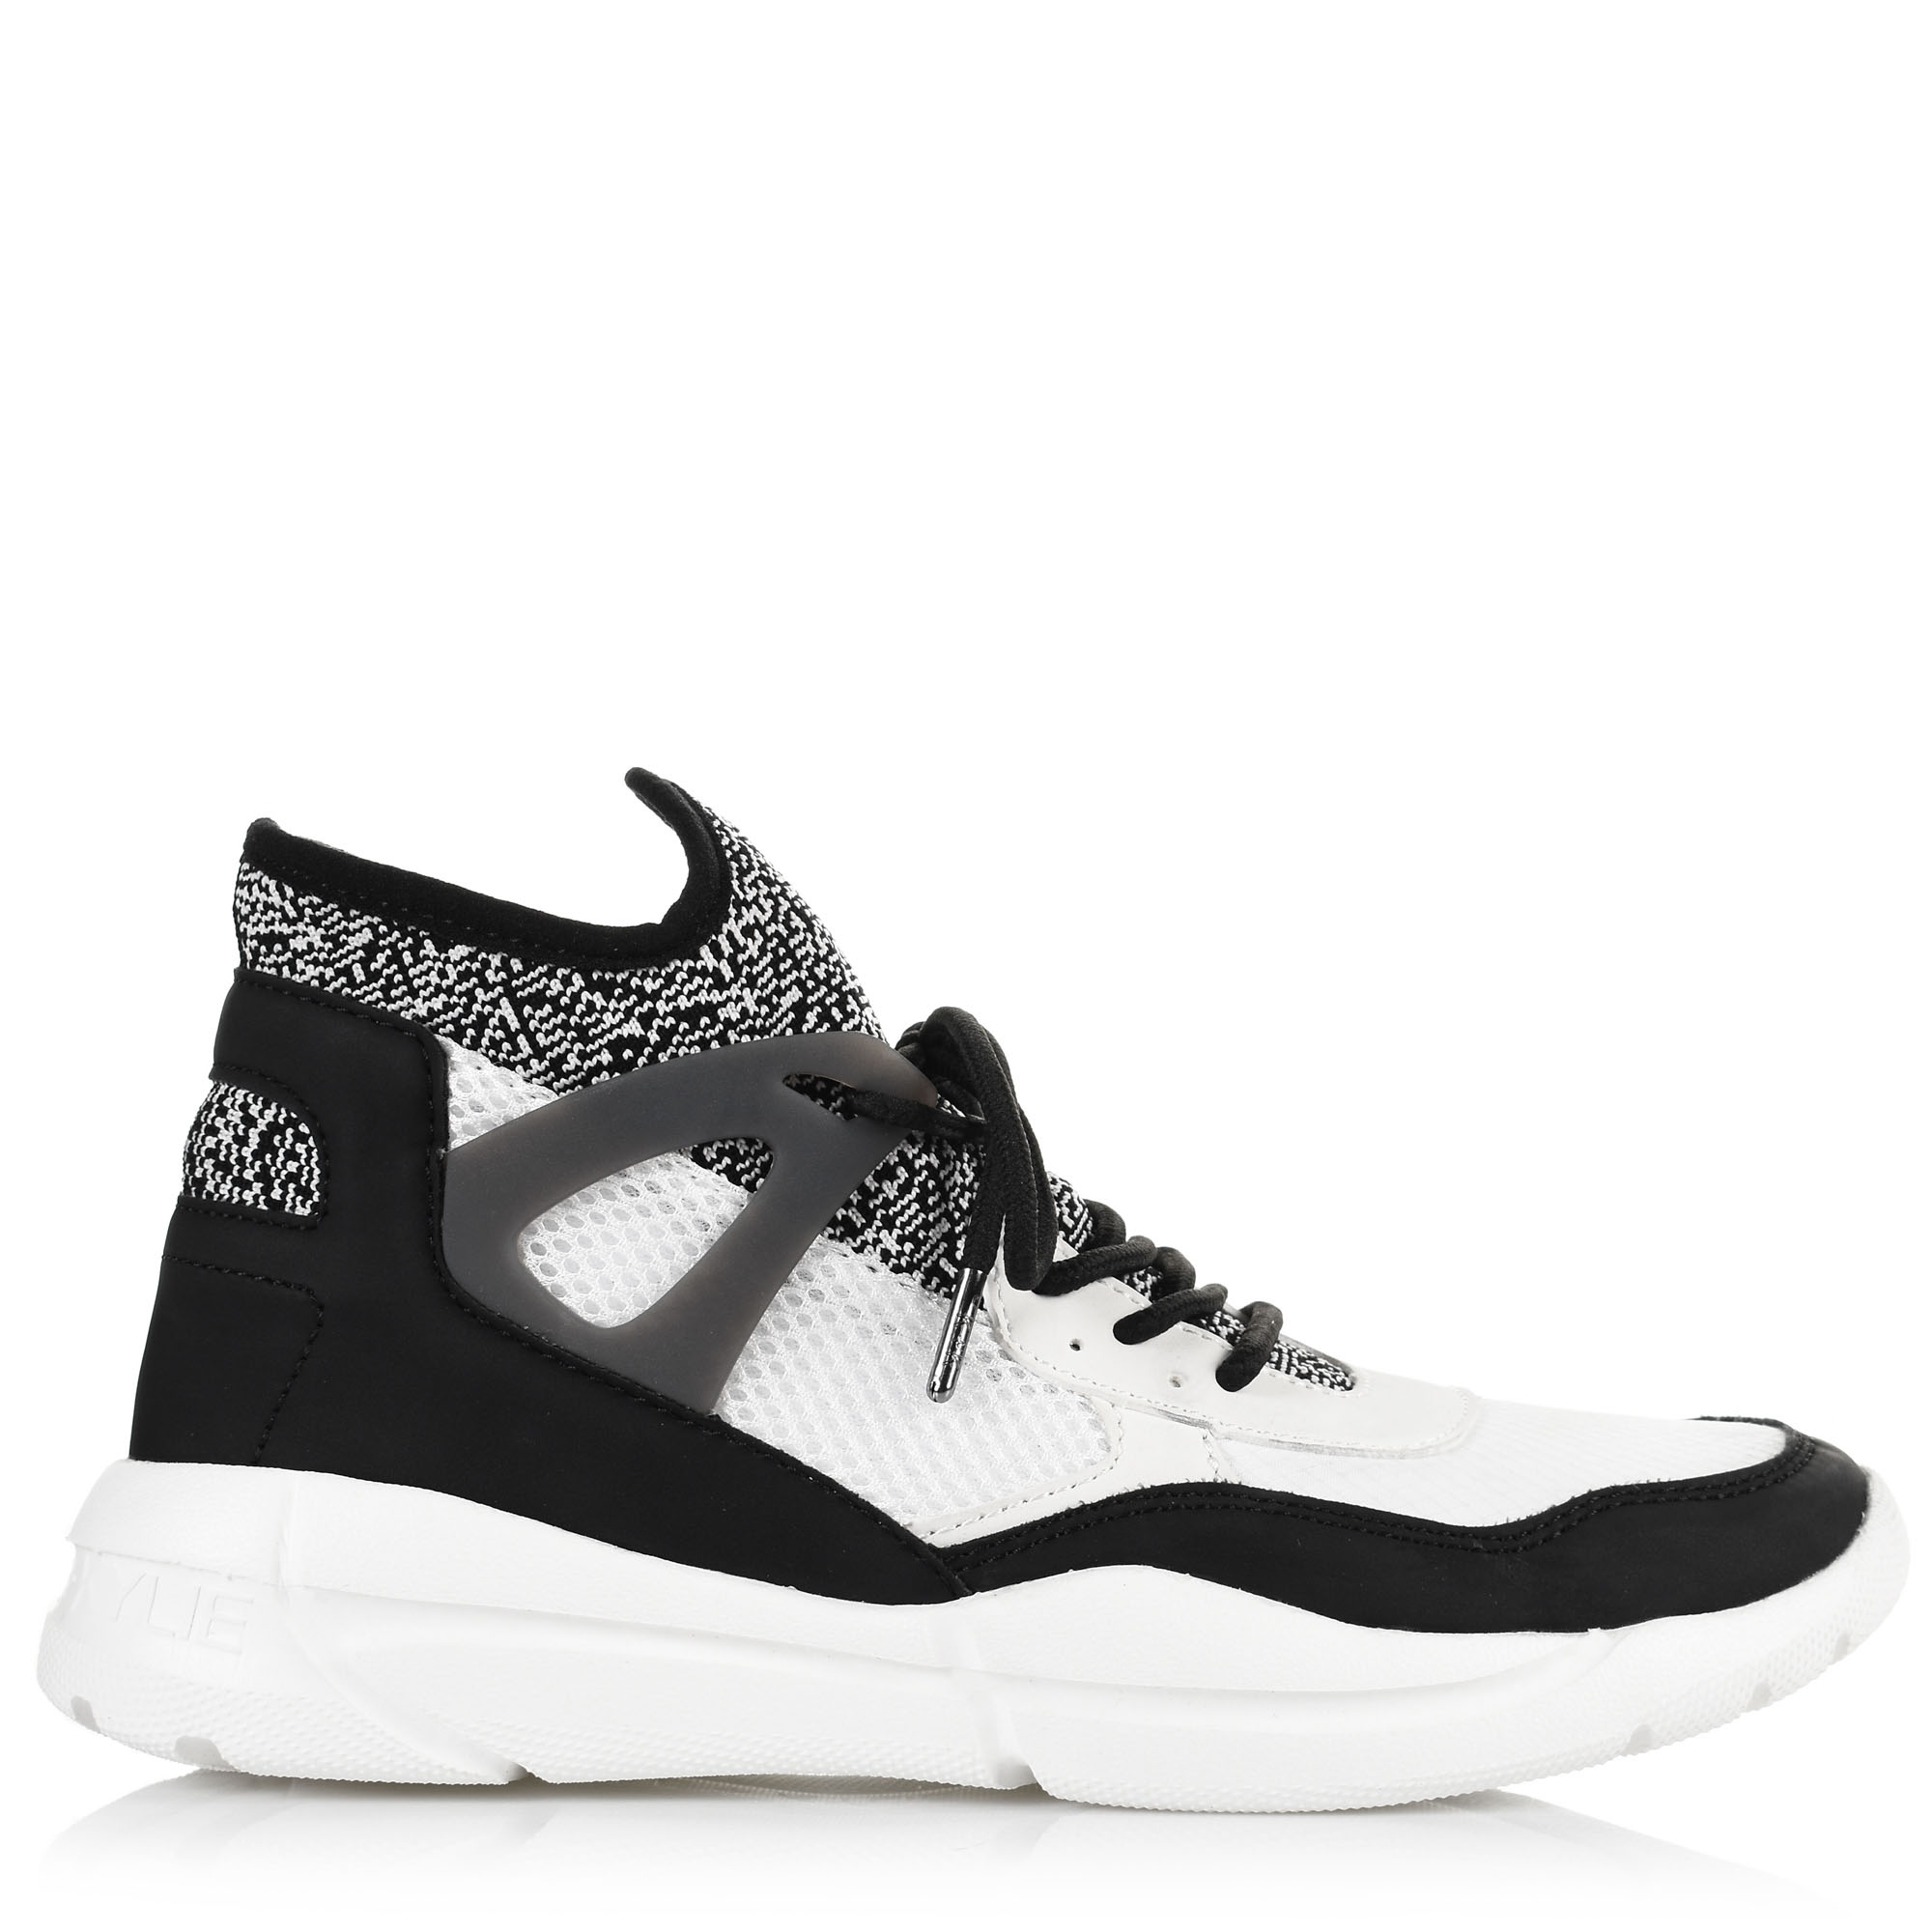 Sneakers Kendall + Kylie North 74116 Γυναίκα  Γυναικείο παπούτσι